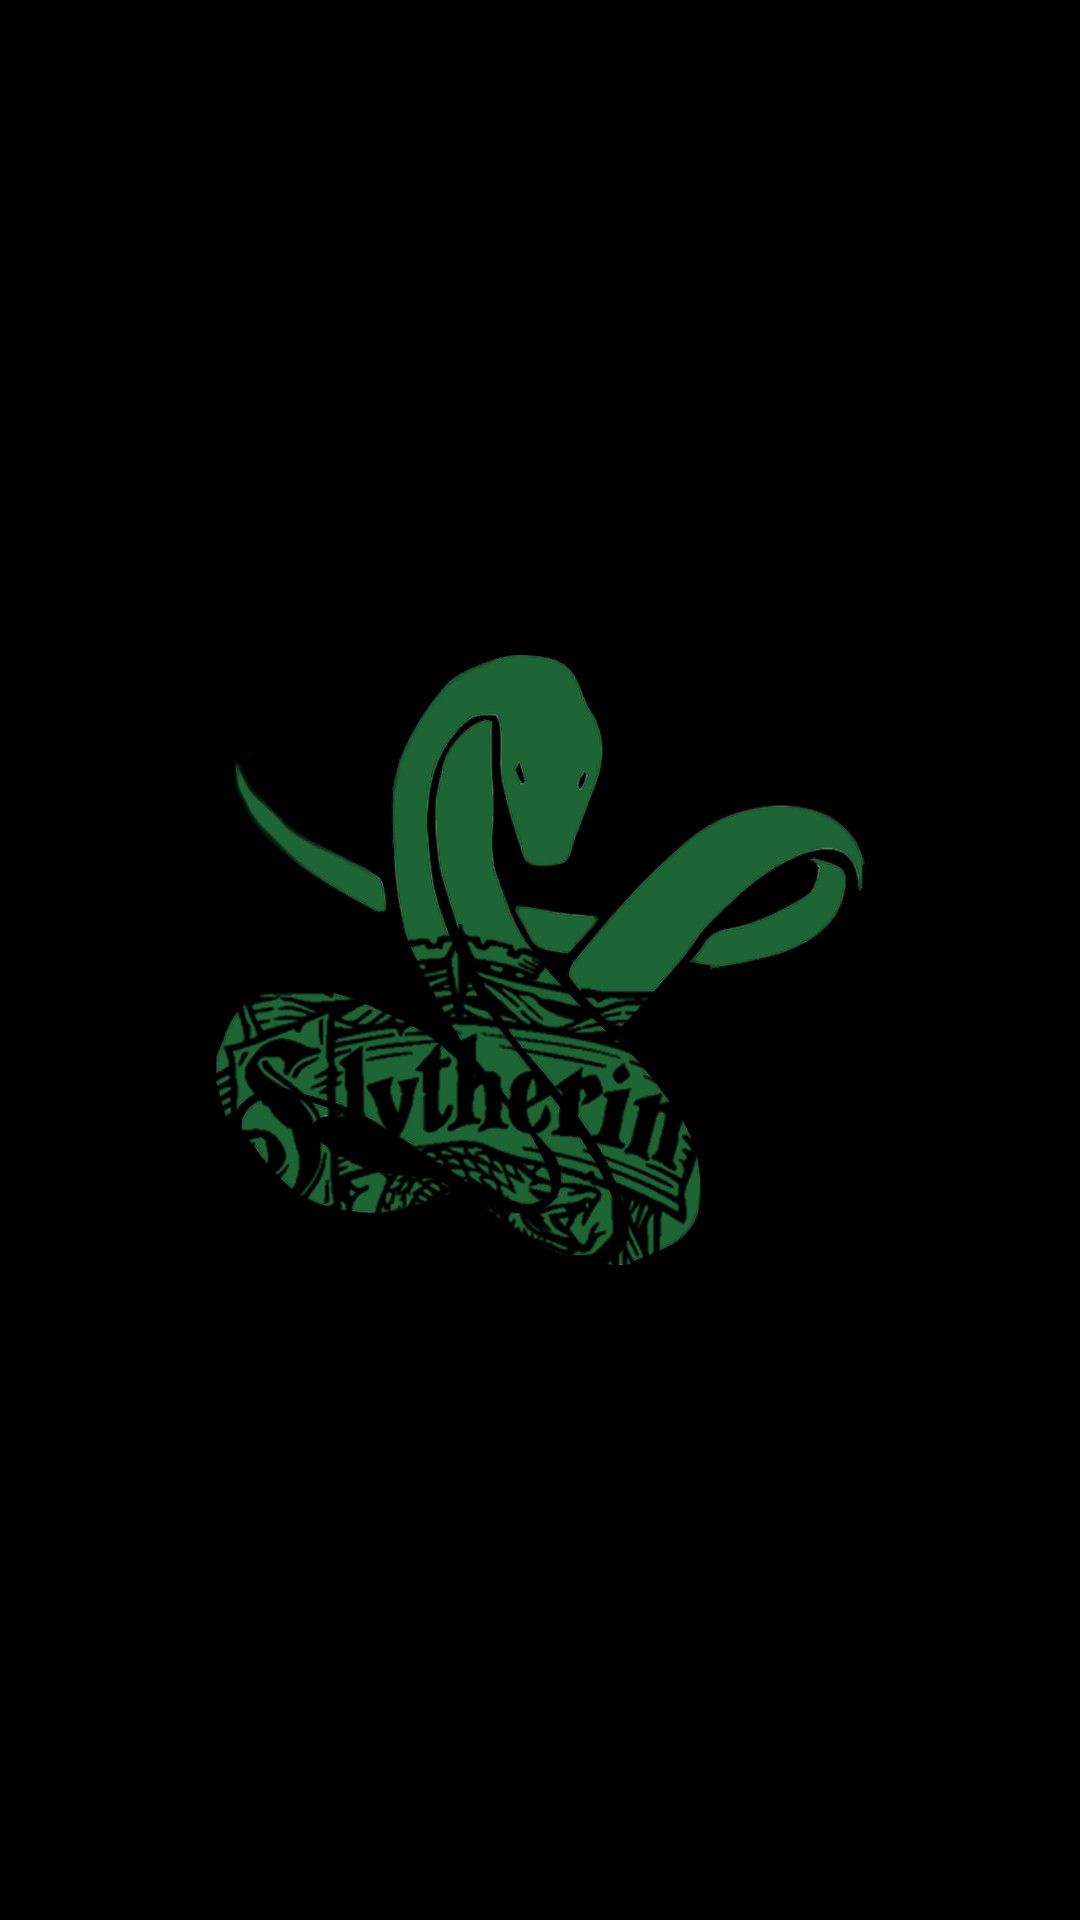 Slytherin iPhone Wallpaper. Harry potter wallpaper, Slytherin wallpaper, Harry potter iphone